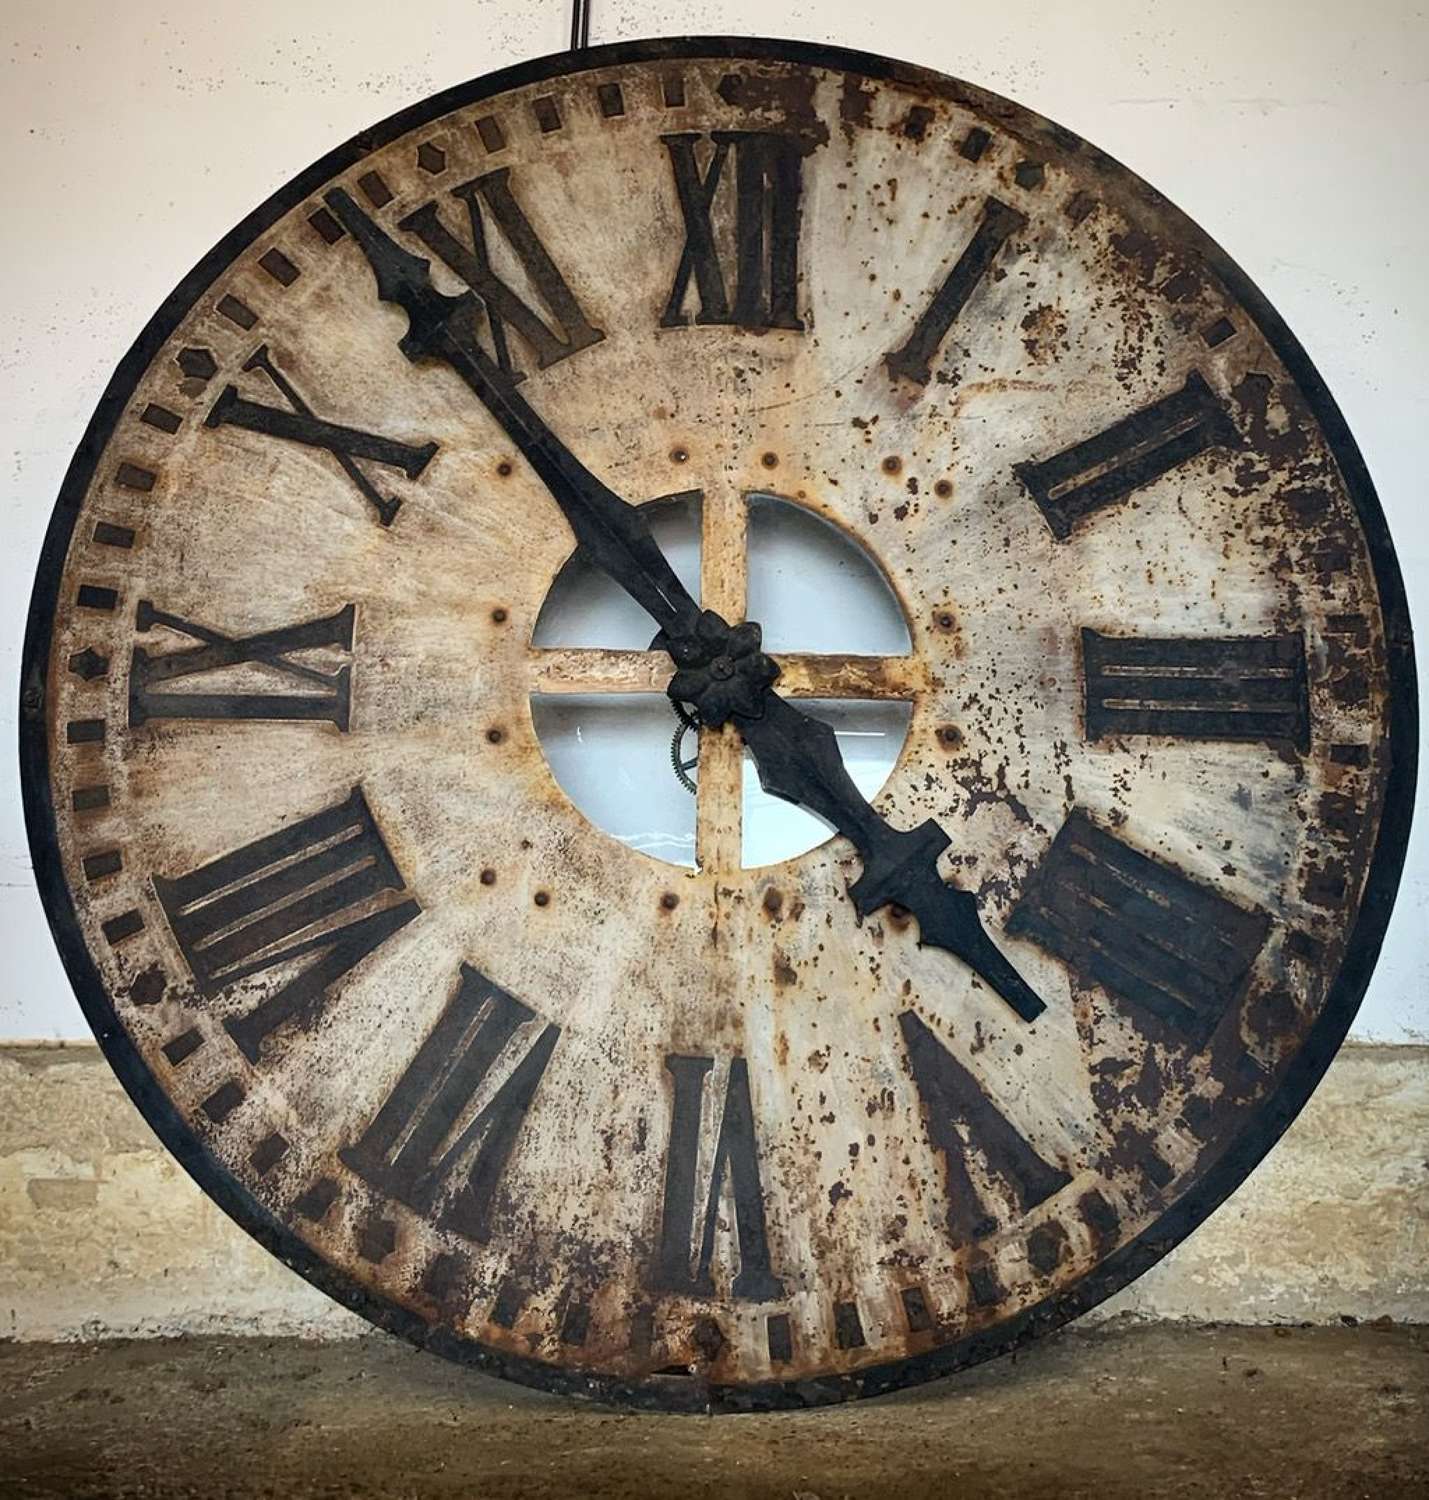 LARGE 19TH CENTURY FRENCH TOWER CLOCK FACE